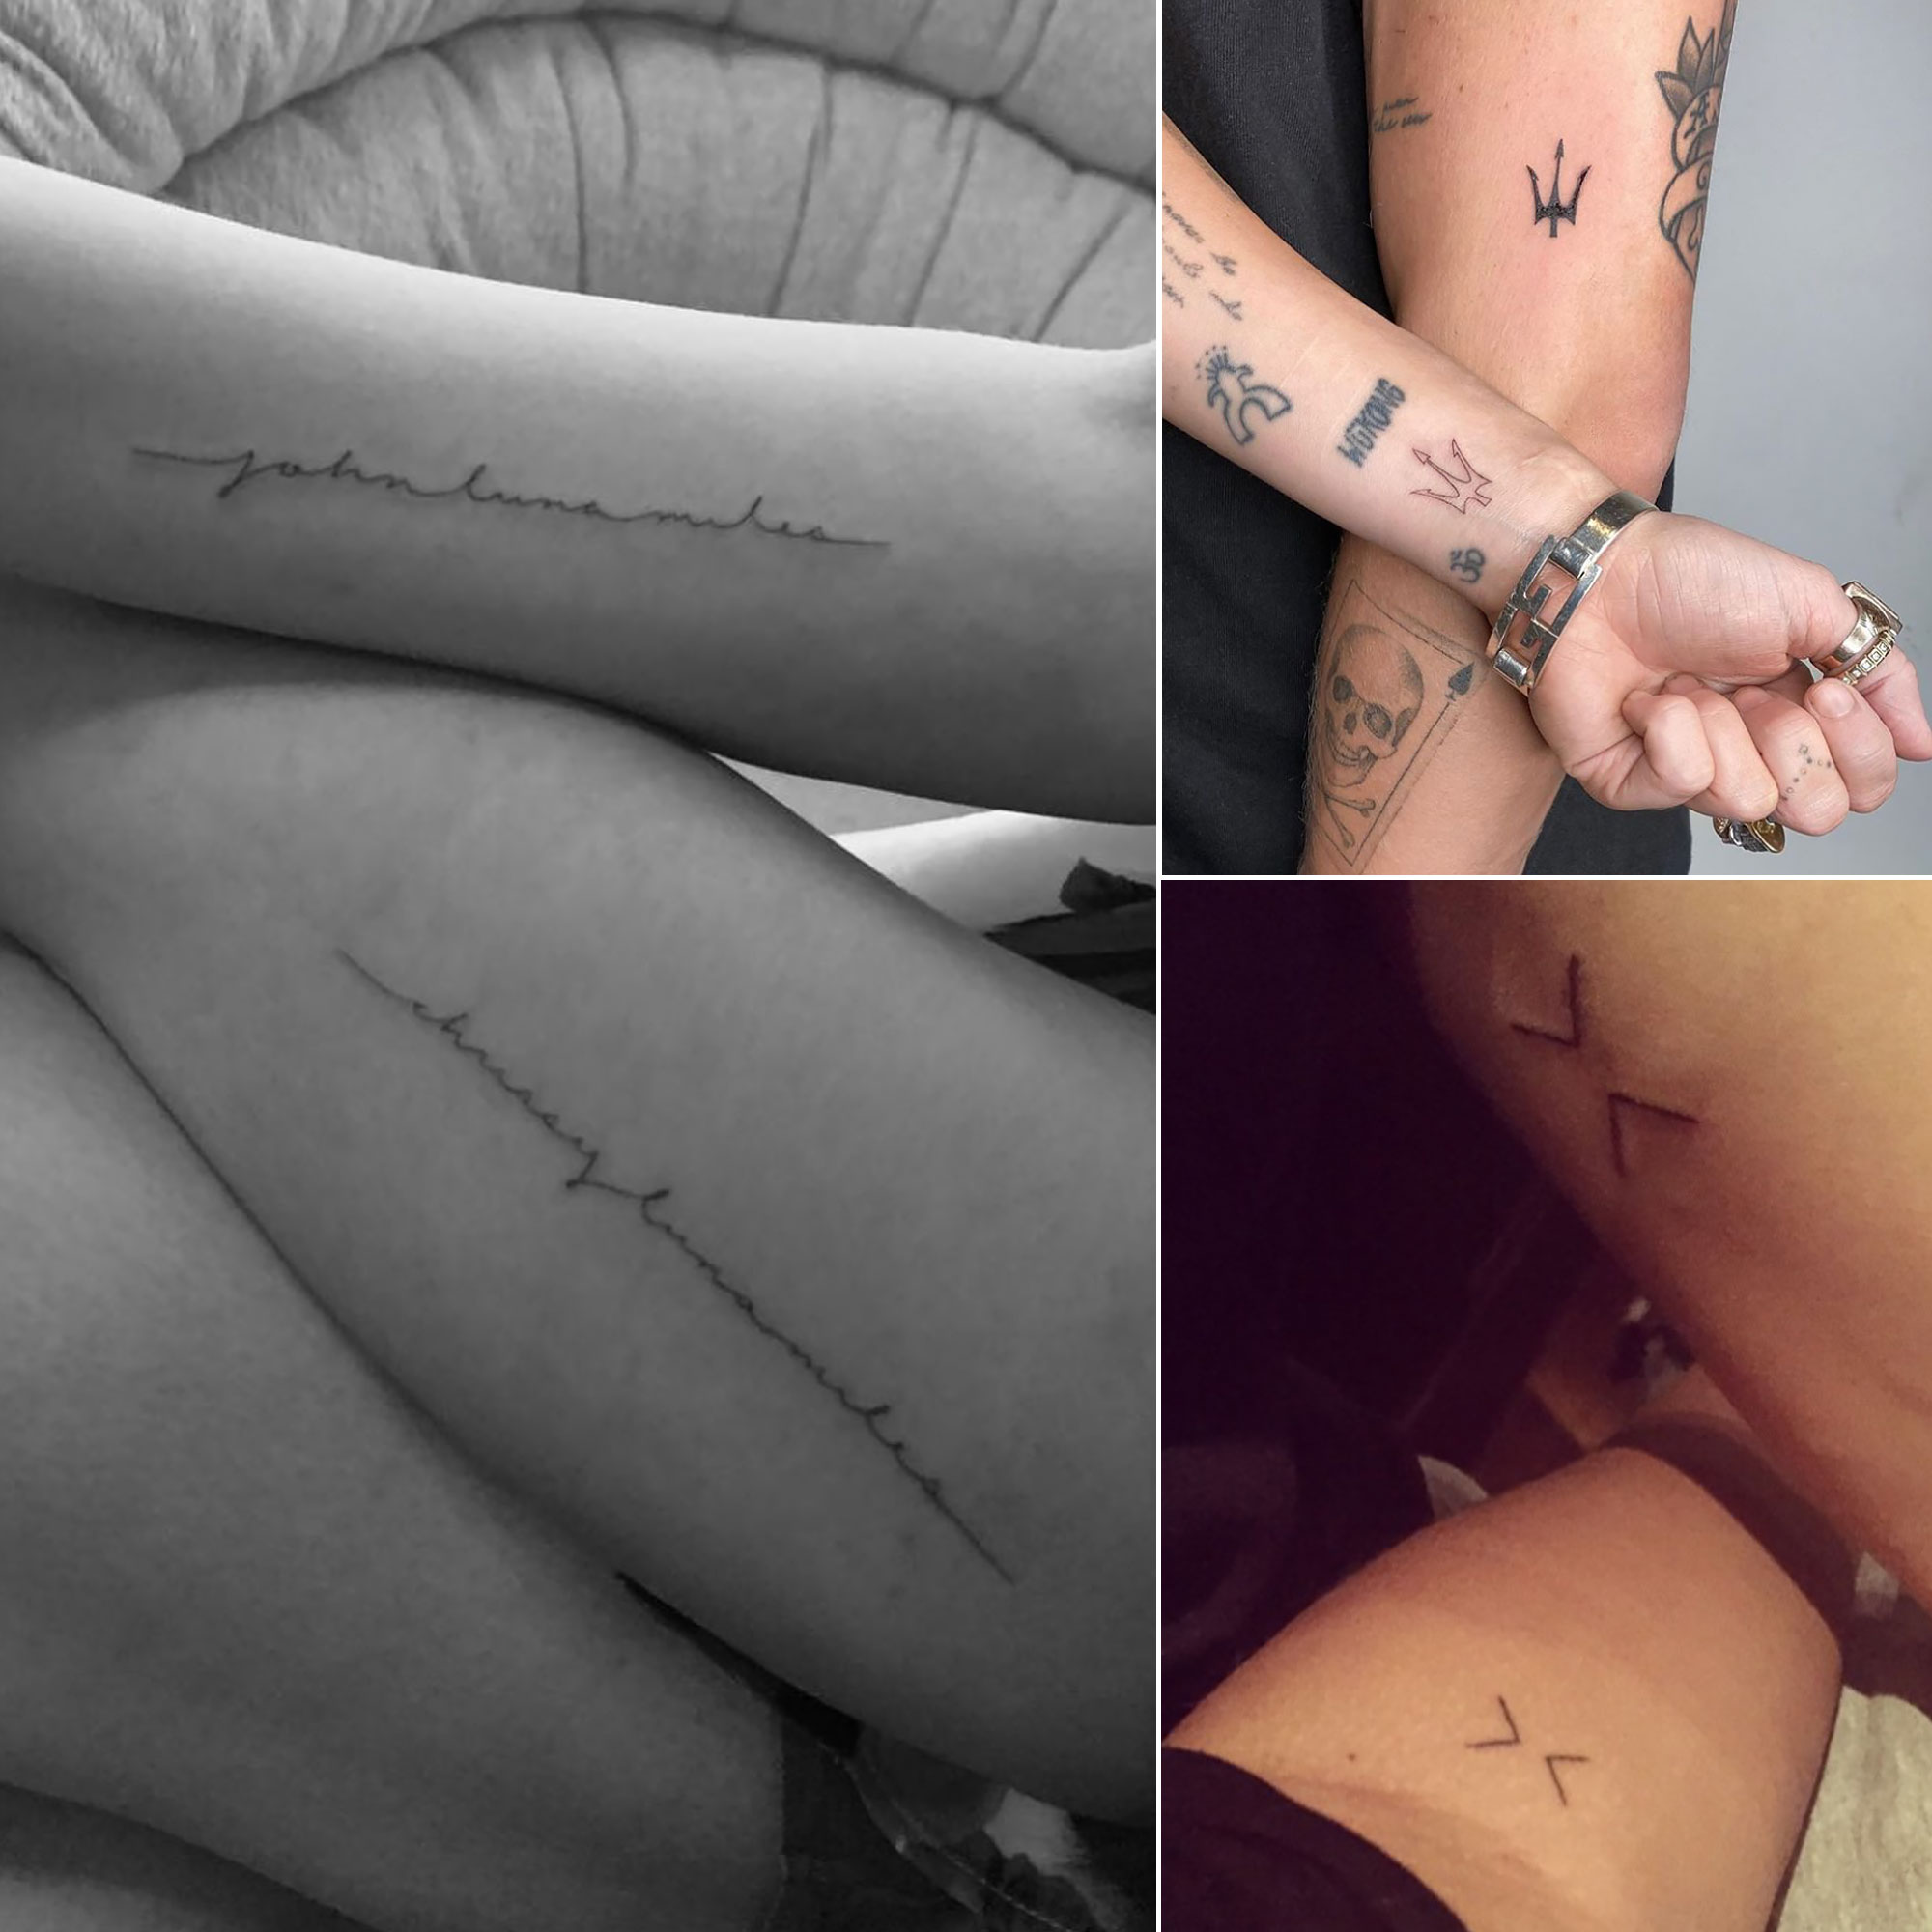 Matching Tattoos For Couples That You Wont Regret If The Relationship Ends